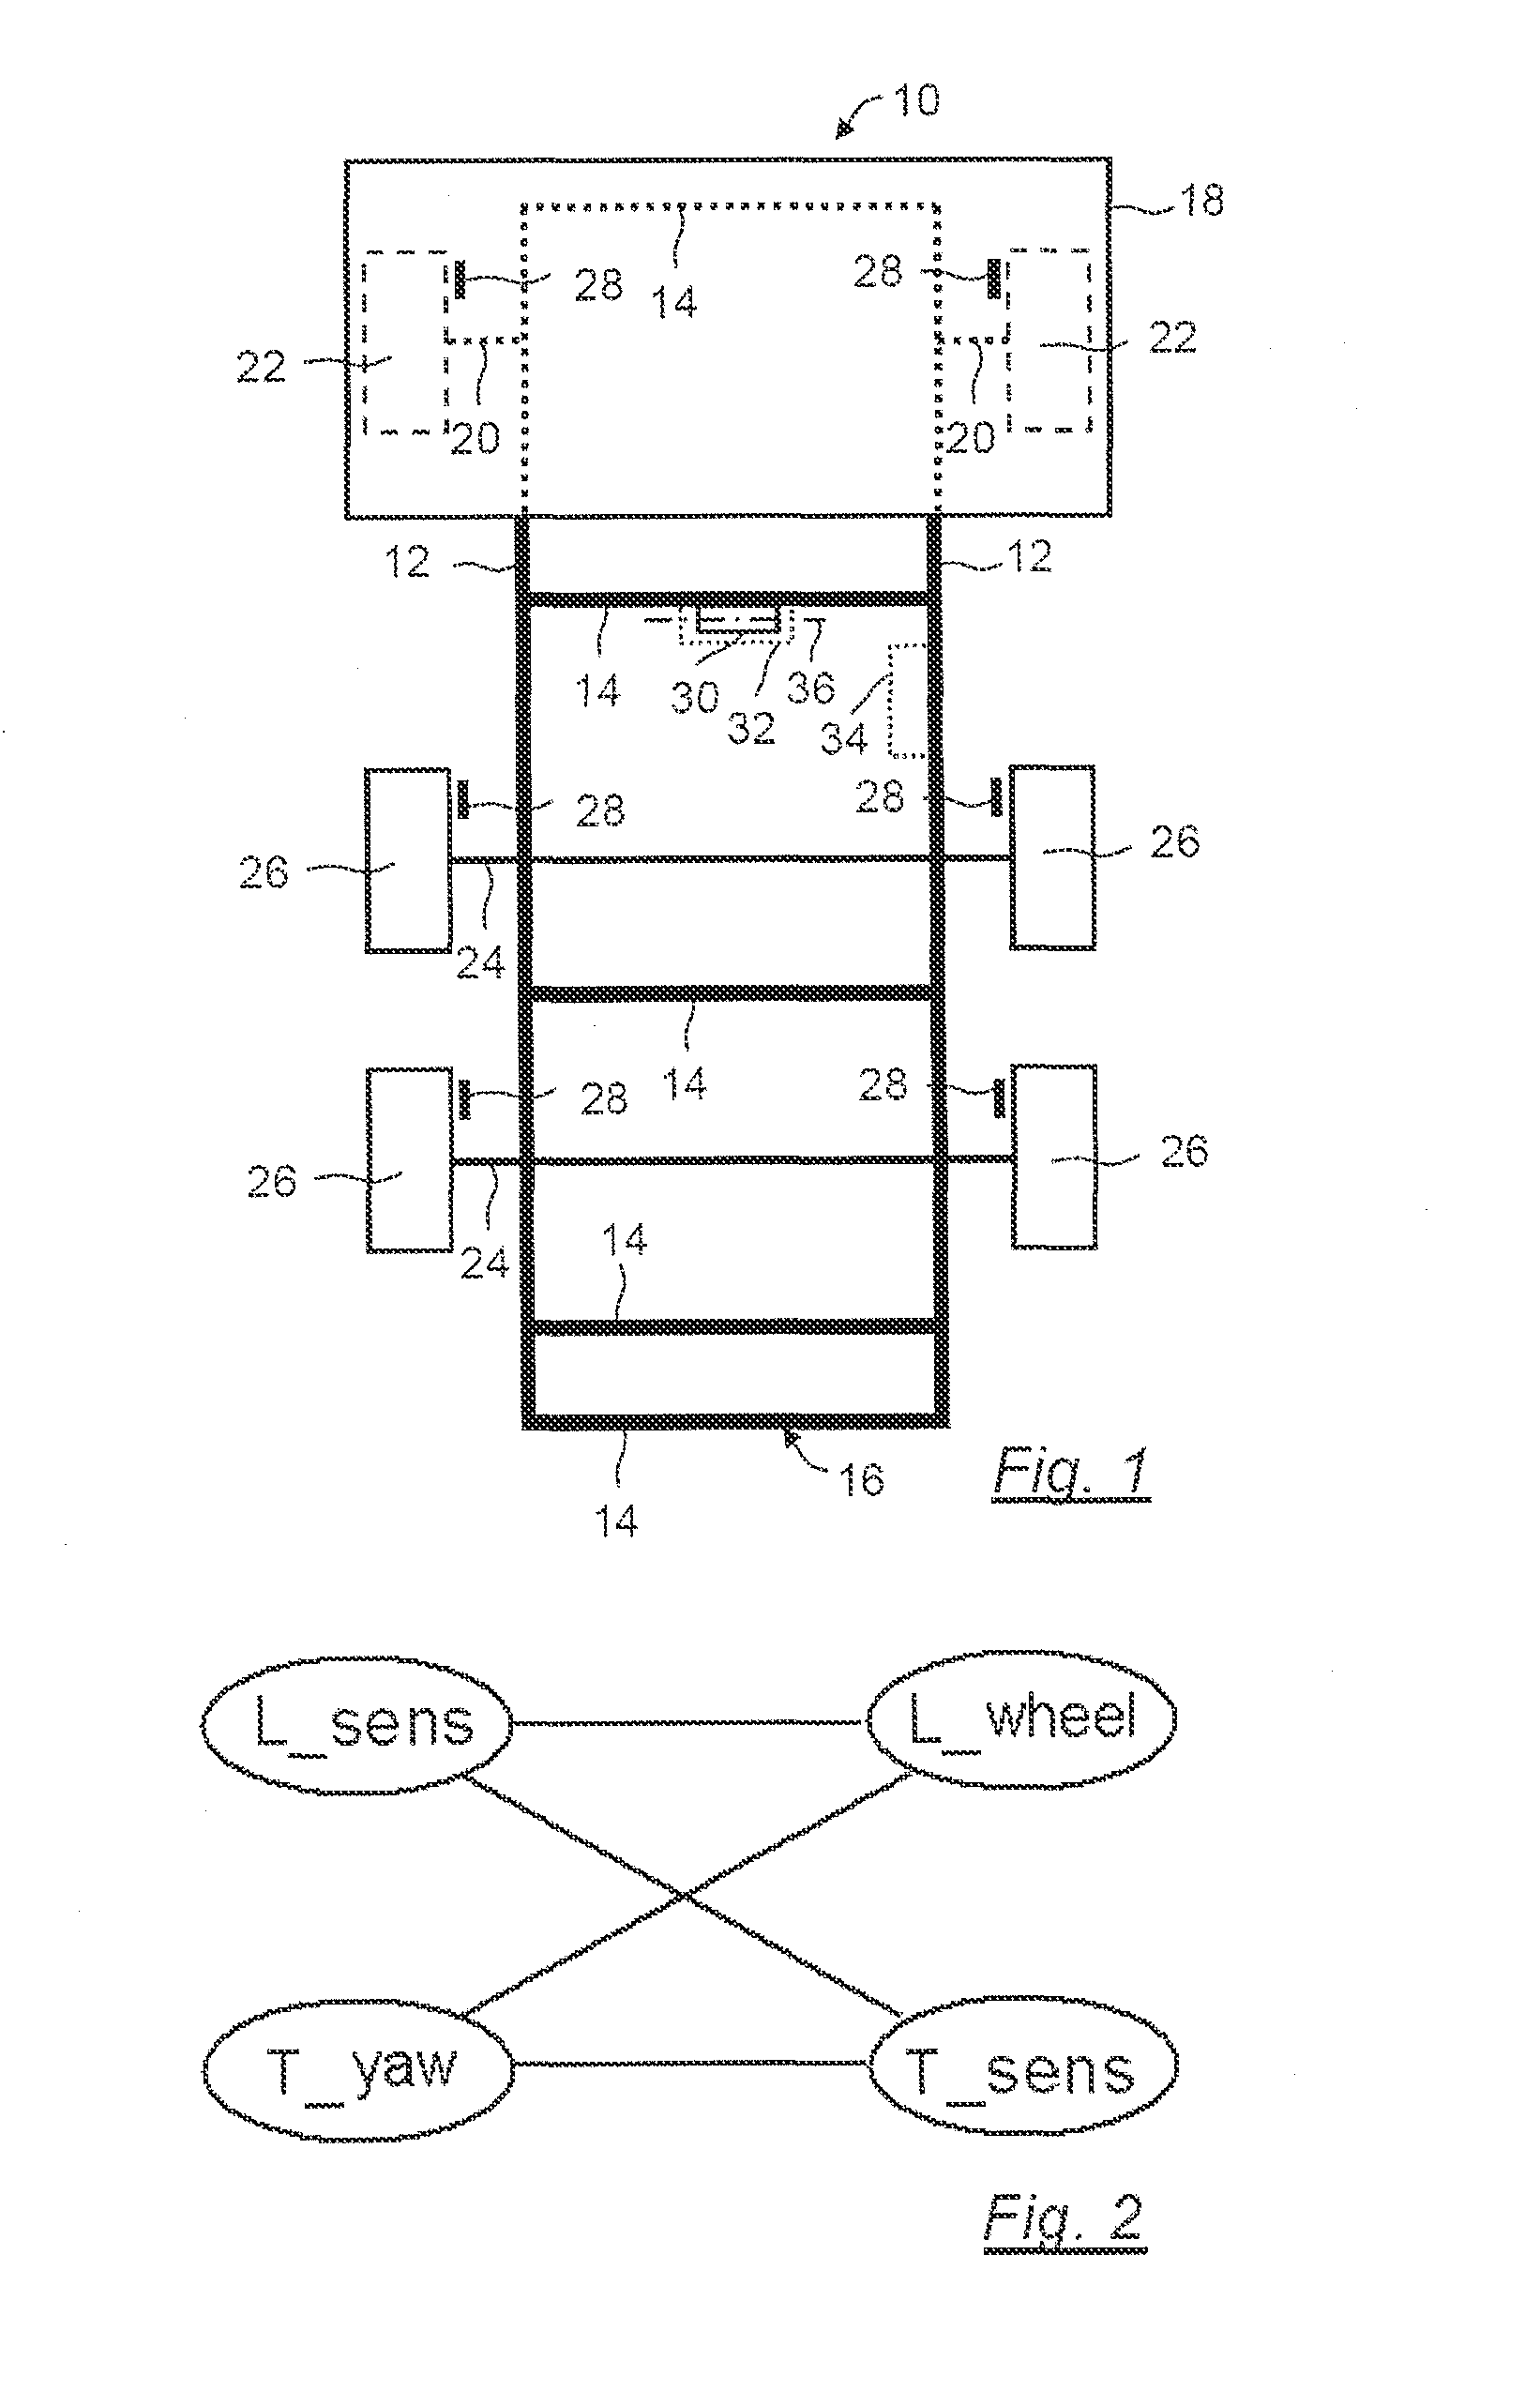 Method and Device for Determining the Installation Position of a Sensor Module in a Vehicle, and Vehicle Having Such a Device